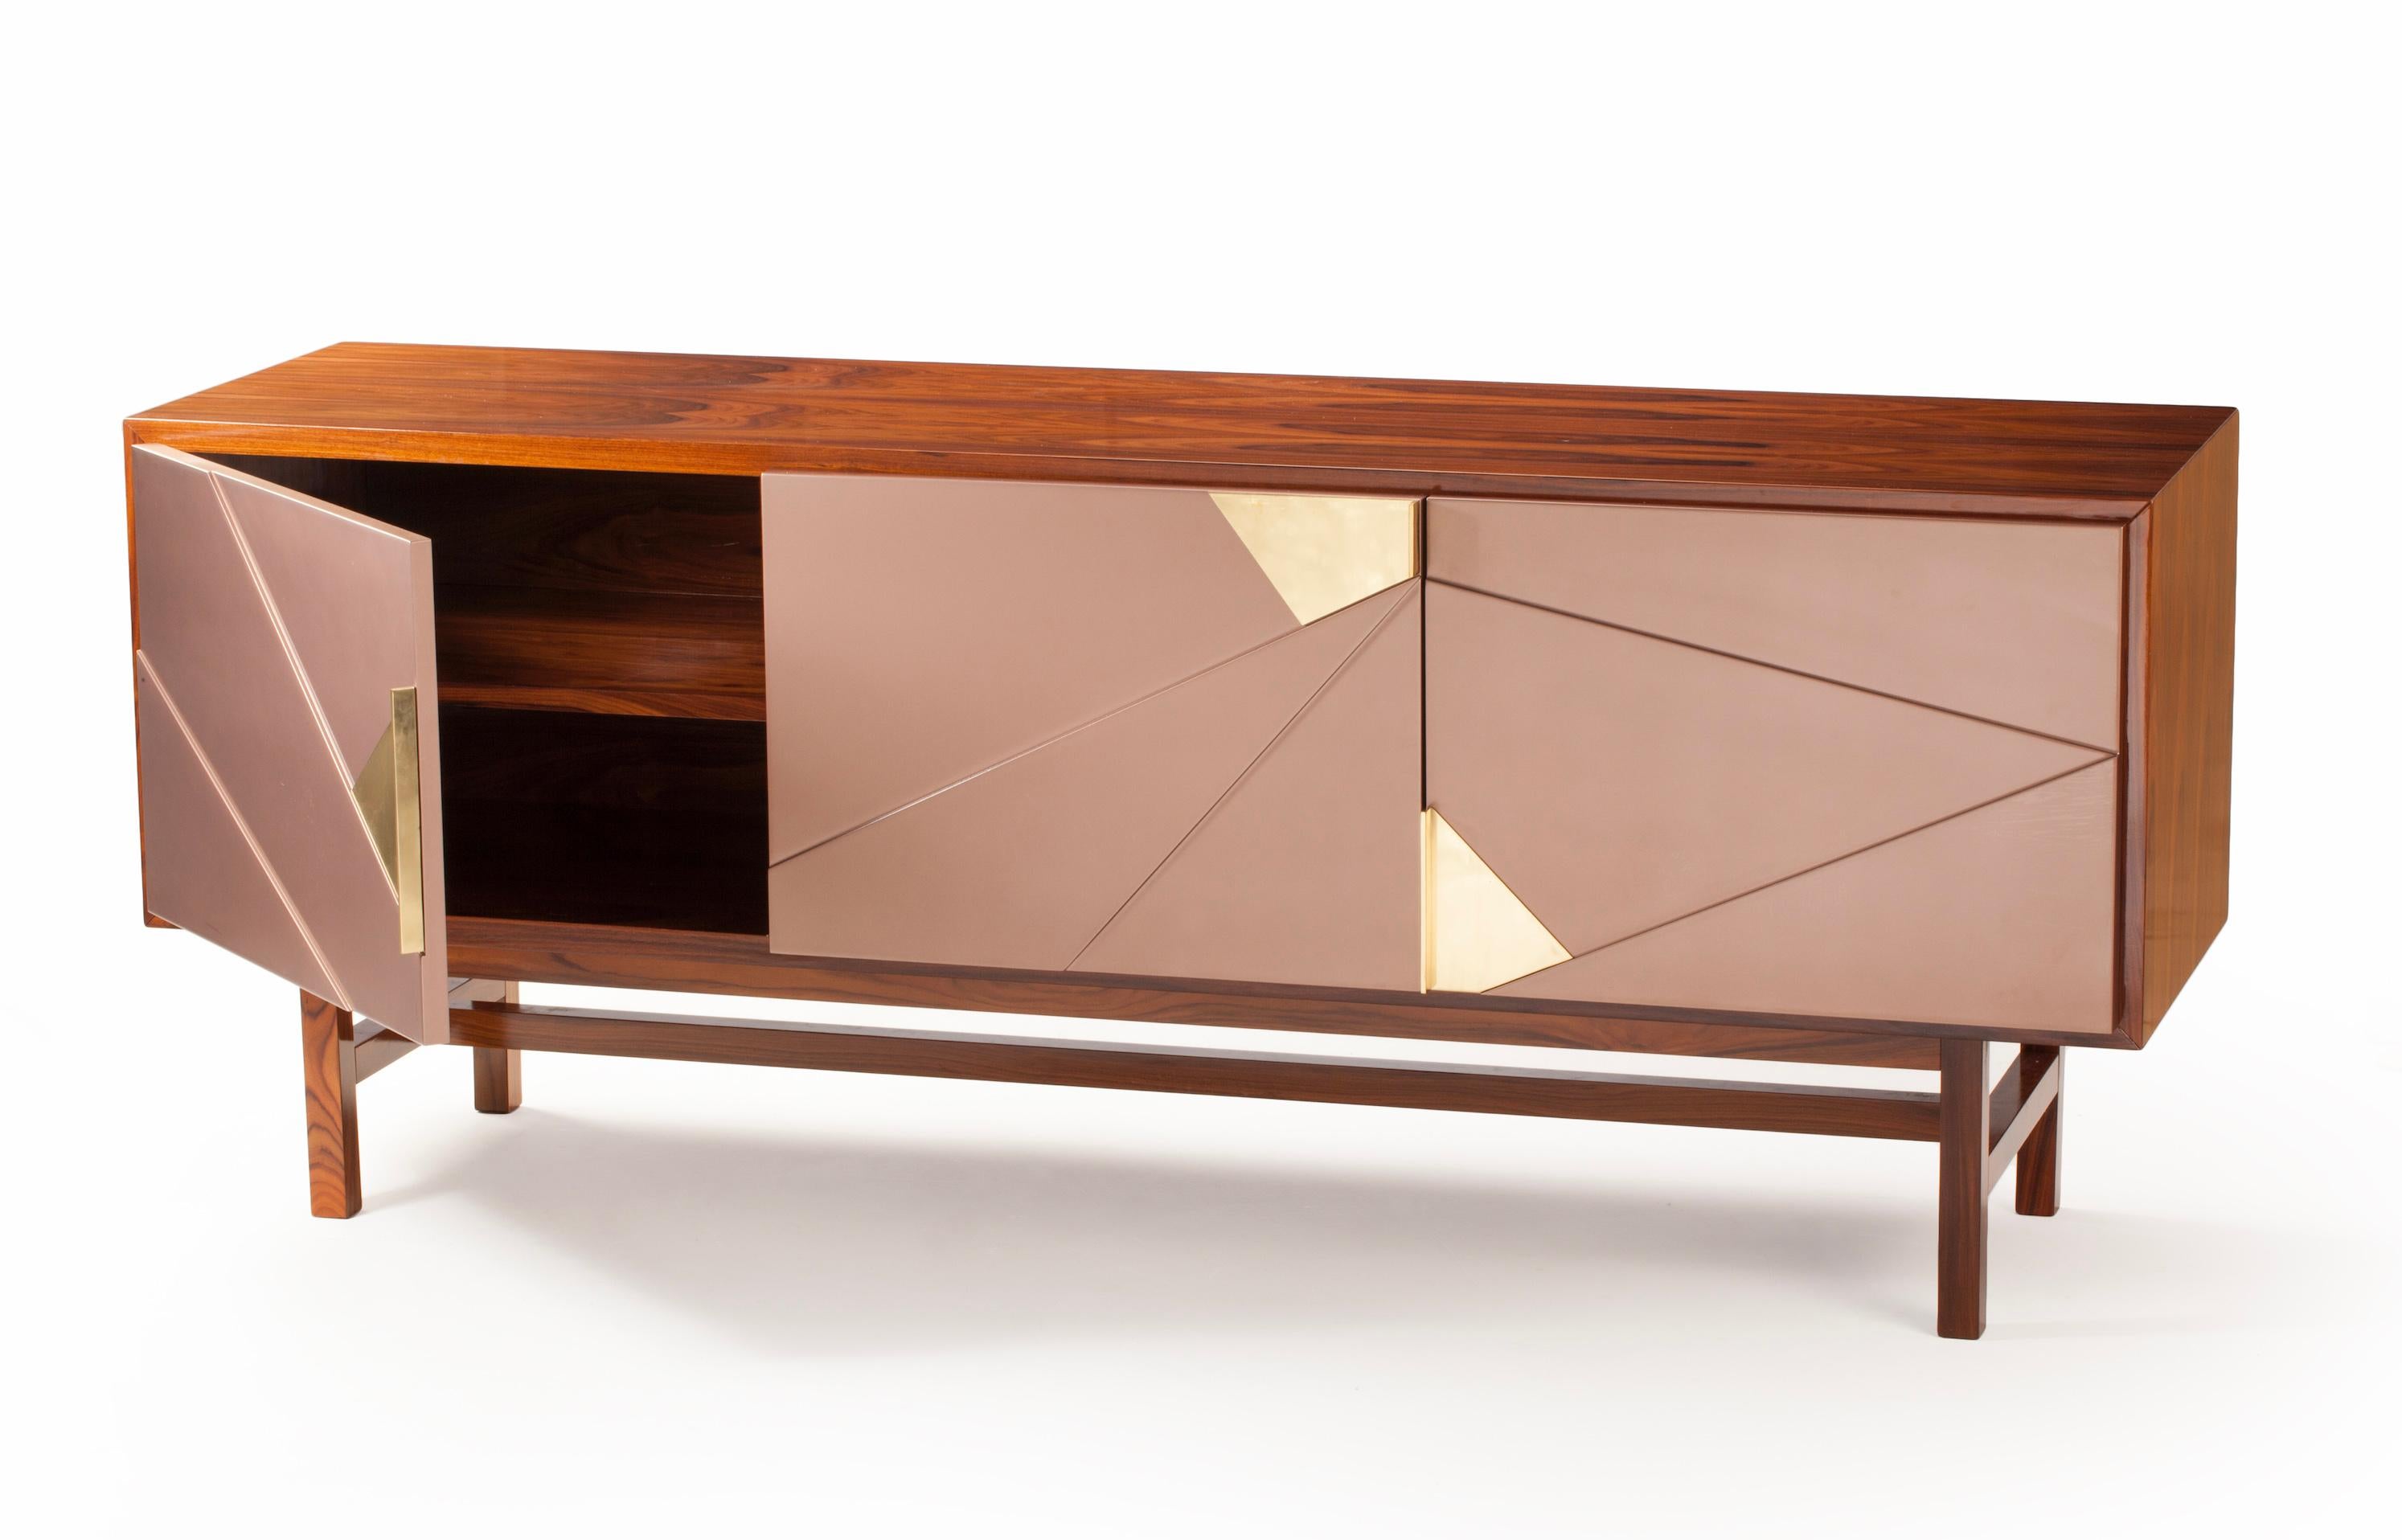 Jazz sideboard is a high quality product by Mambo Unlimited Ideas, crafted in polished or matte iron wood venner structure and feet, brass applications and lacquered doors. It features three dimensional designs on its doors, elegant oxidized brass